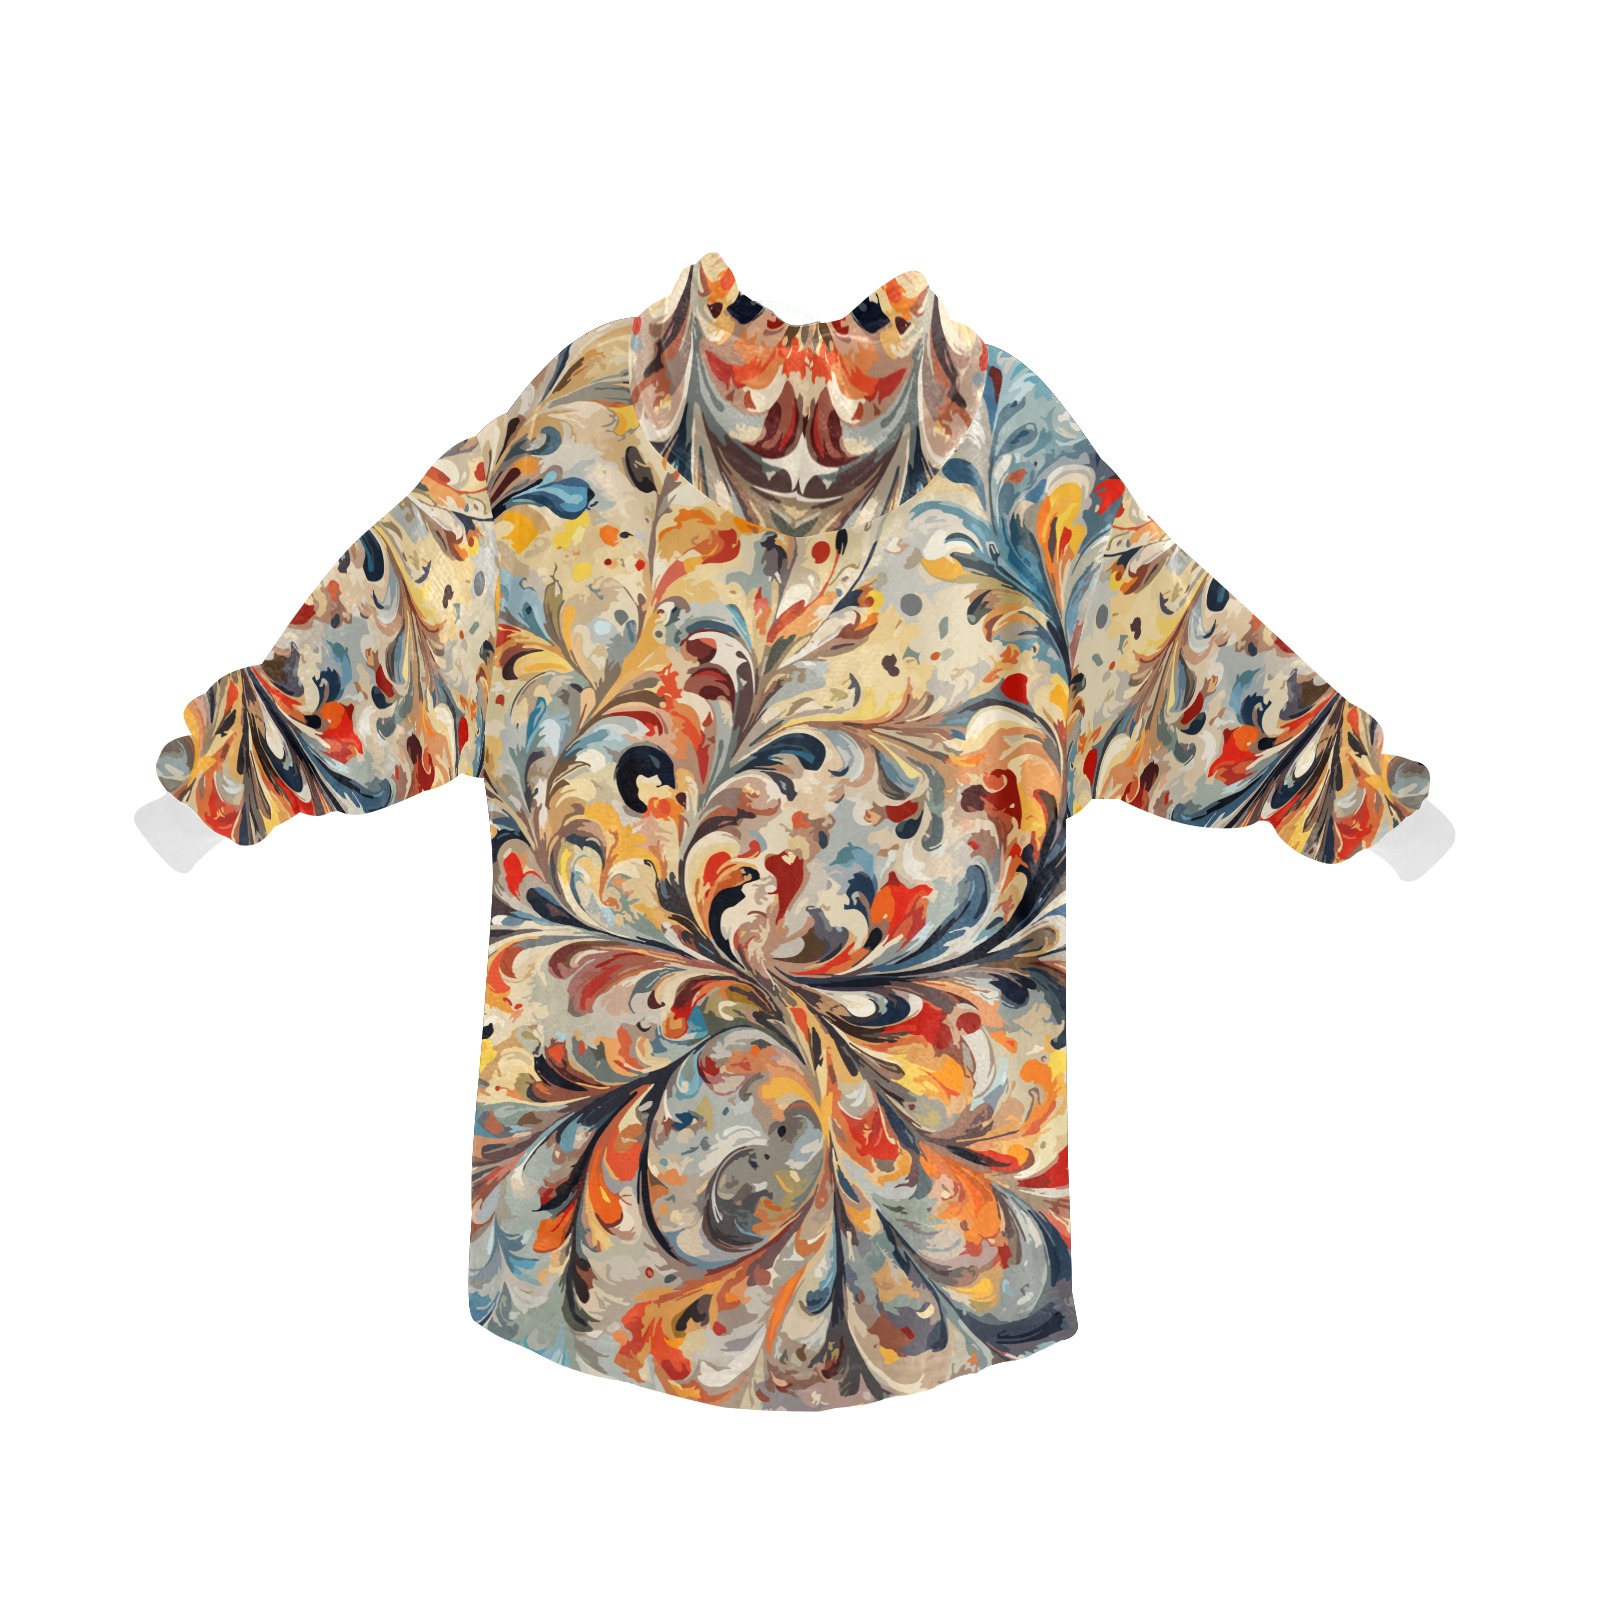 Stylish floral ornament. Beautiful colorful art Blanket Hoodie for Women